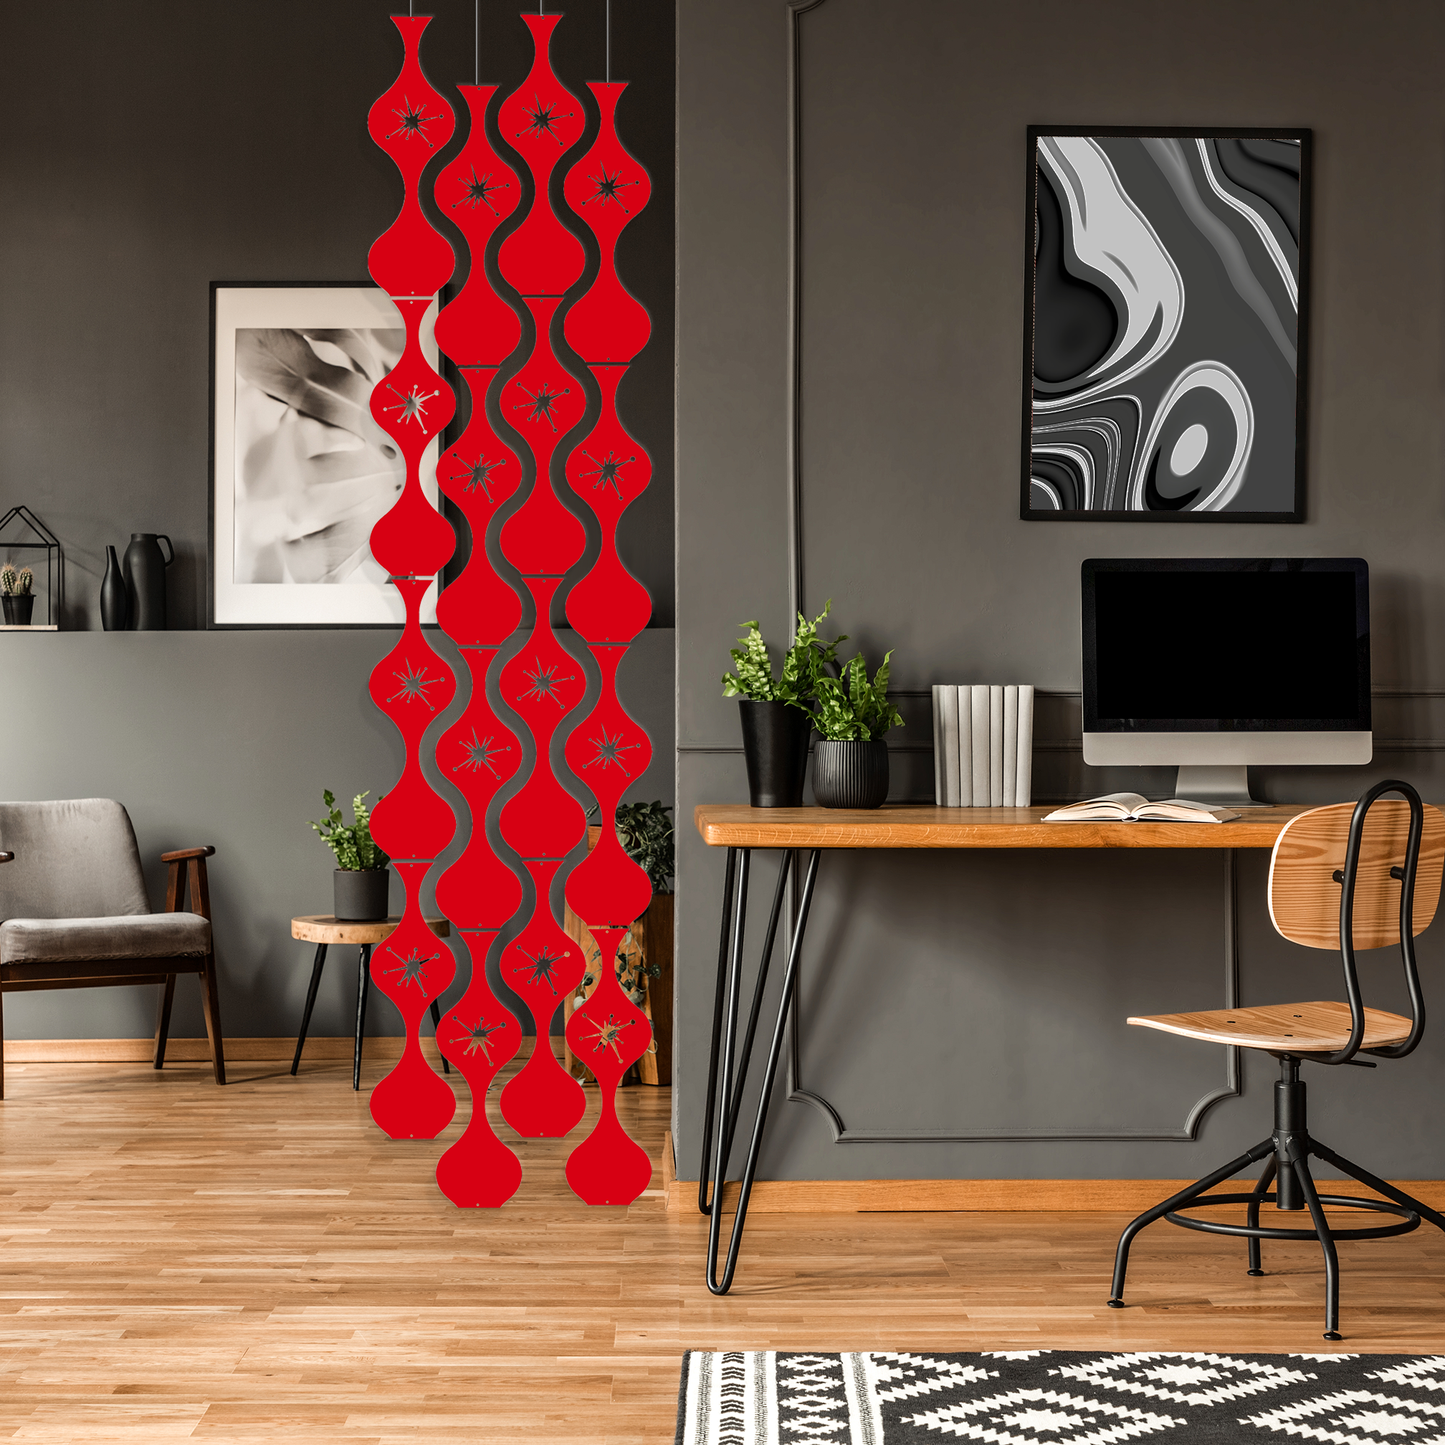 Jeannie Stardust Retro Room Mobile in red with mid century modern starburst cutouts in home office by AtomicMobiles.com